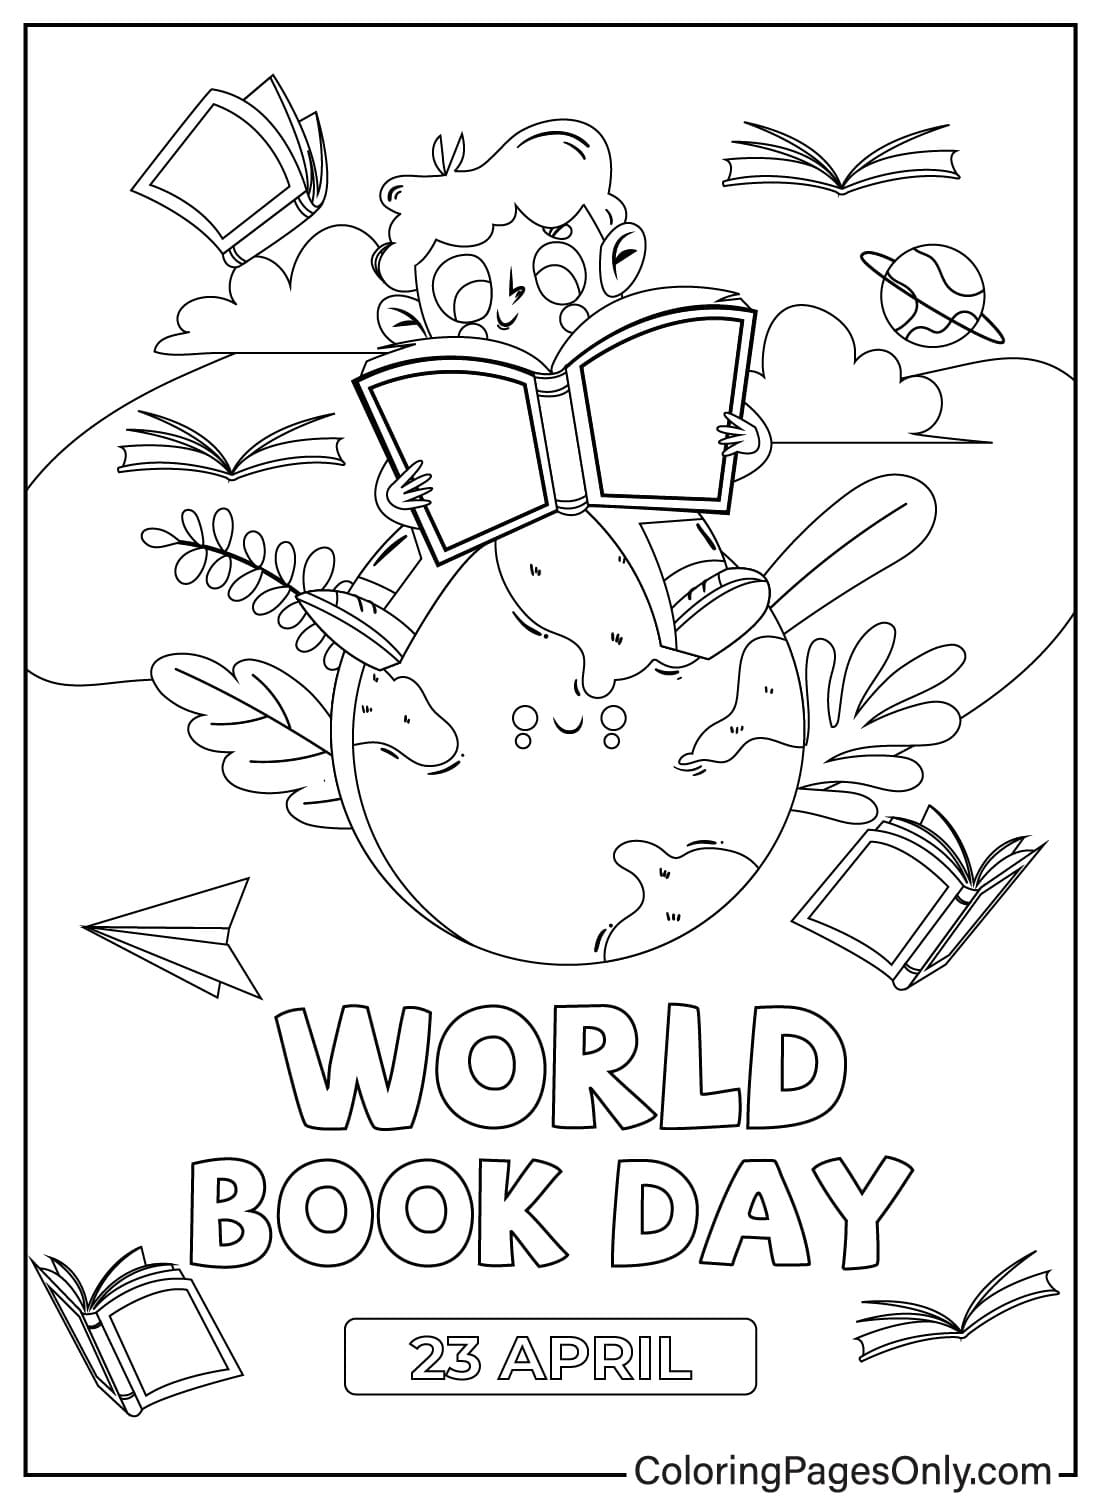 World Book Day Free Coloring Pages for Kids & Adults from World Book Day